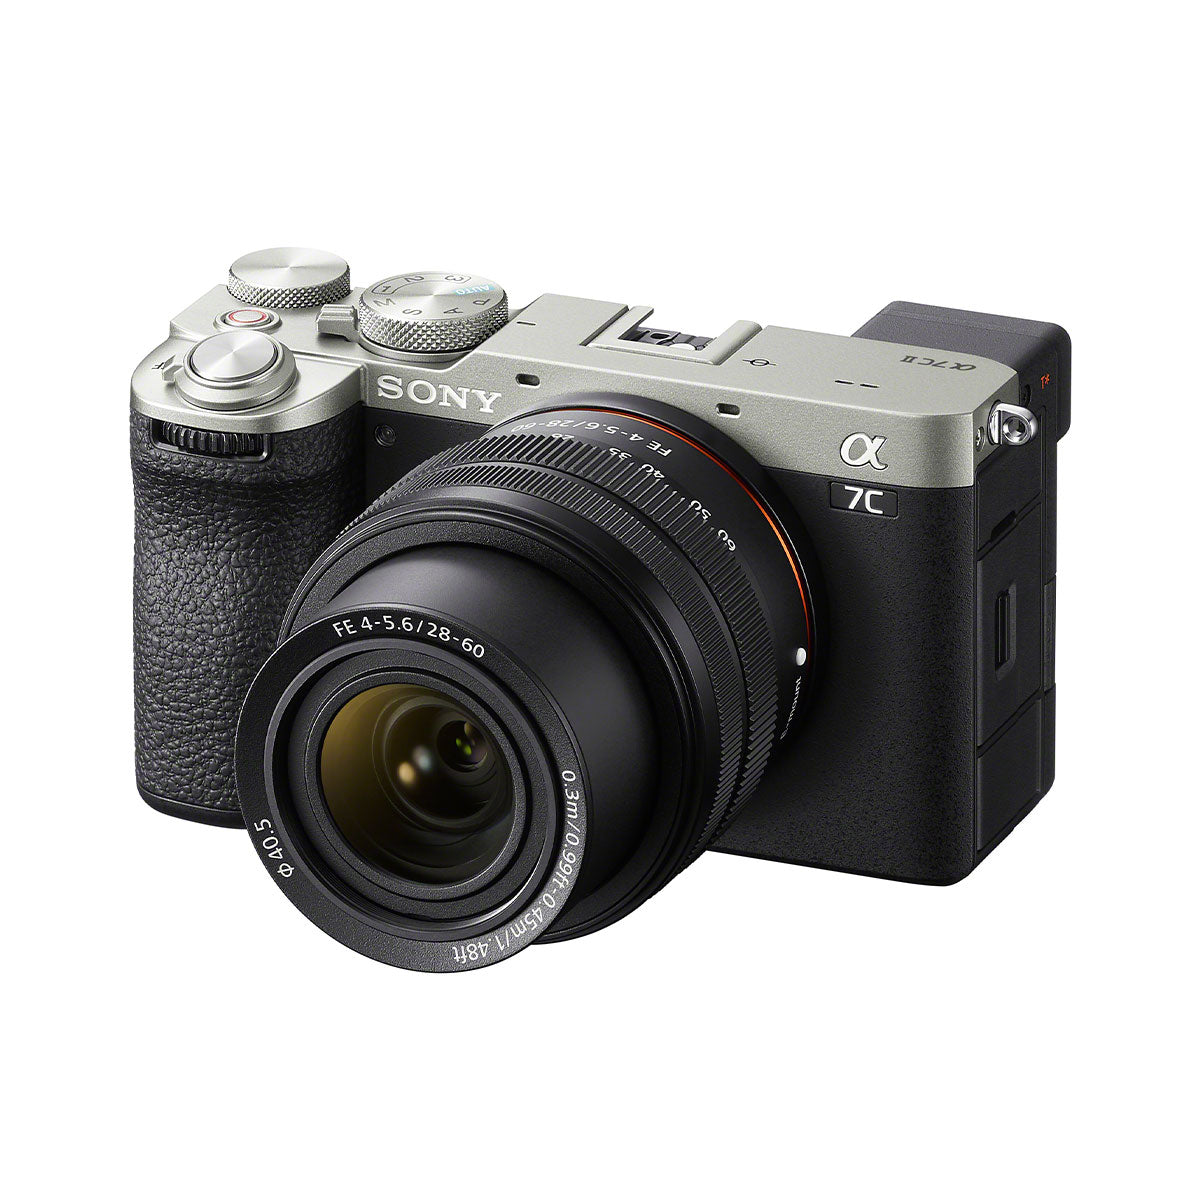 Sony a7C II Mirrorless Camera with FE 28-60mm f/4-5.6 Lens (Silver)